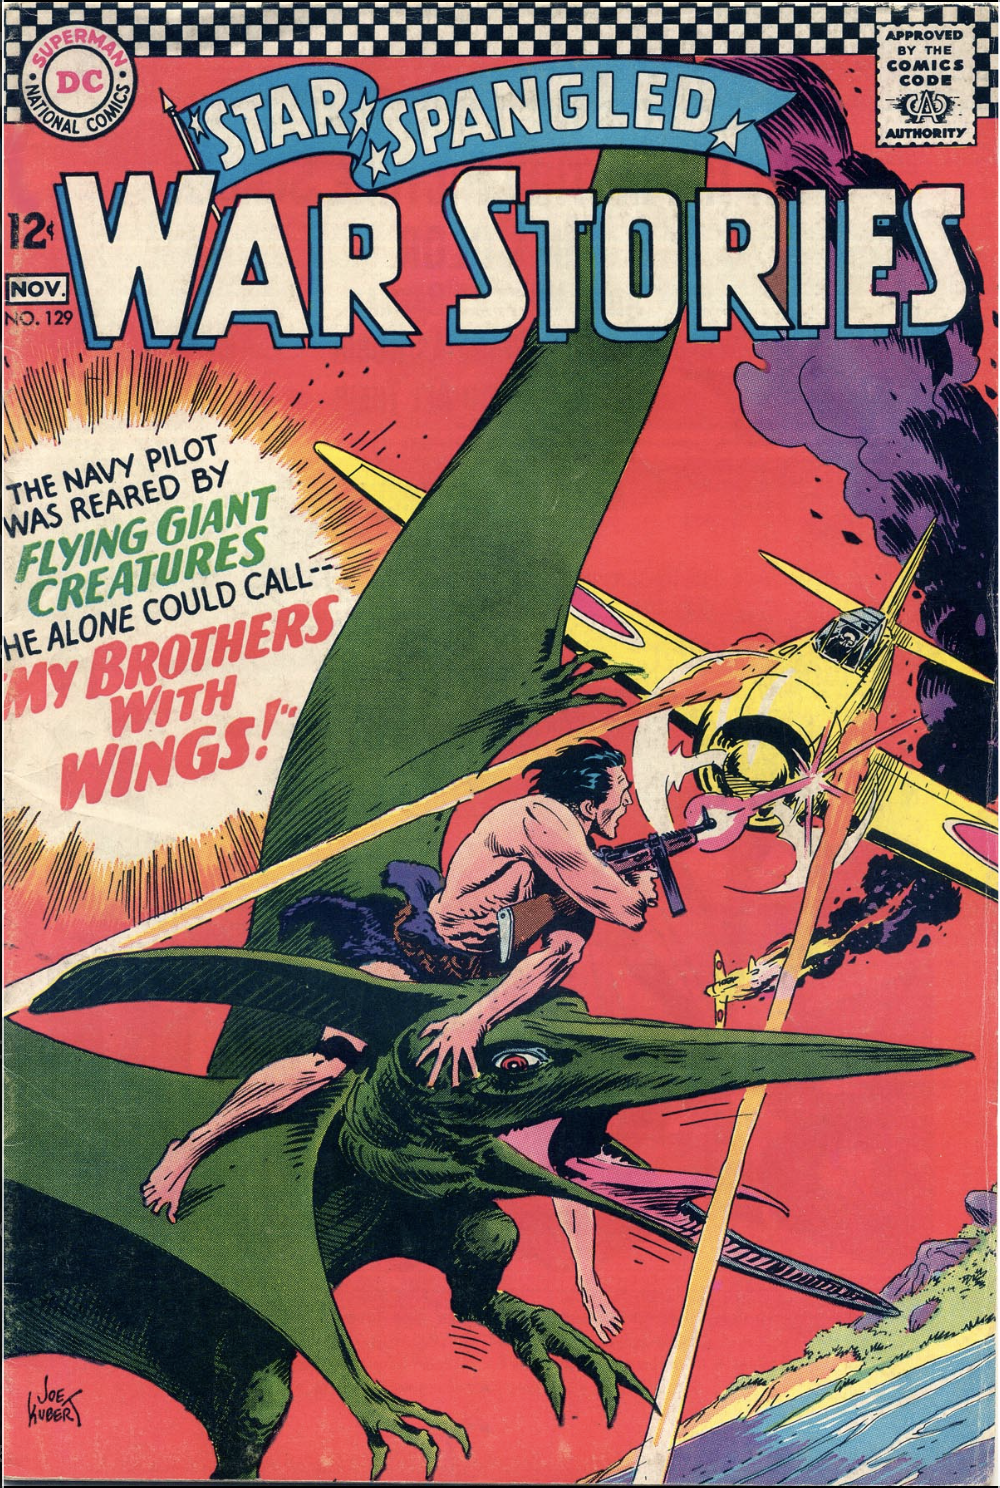 I Was a Pteenage Pterodactyl (Star Spangled War Stories 129/Our Fighting Forces 103)